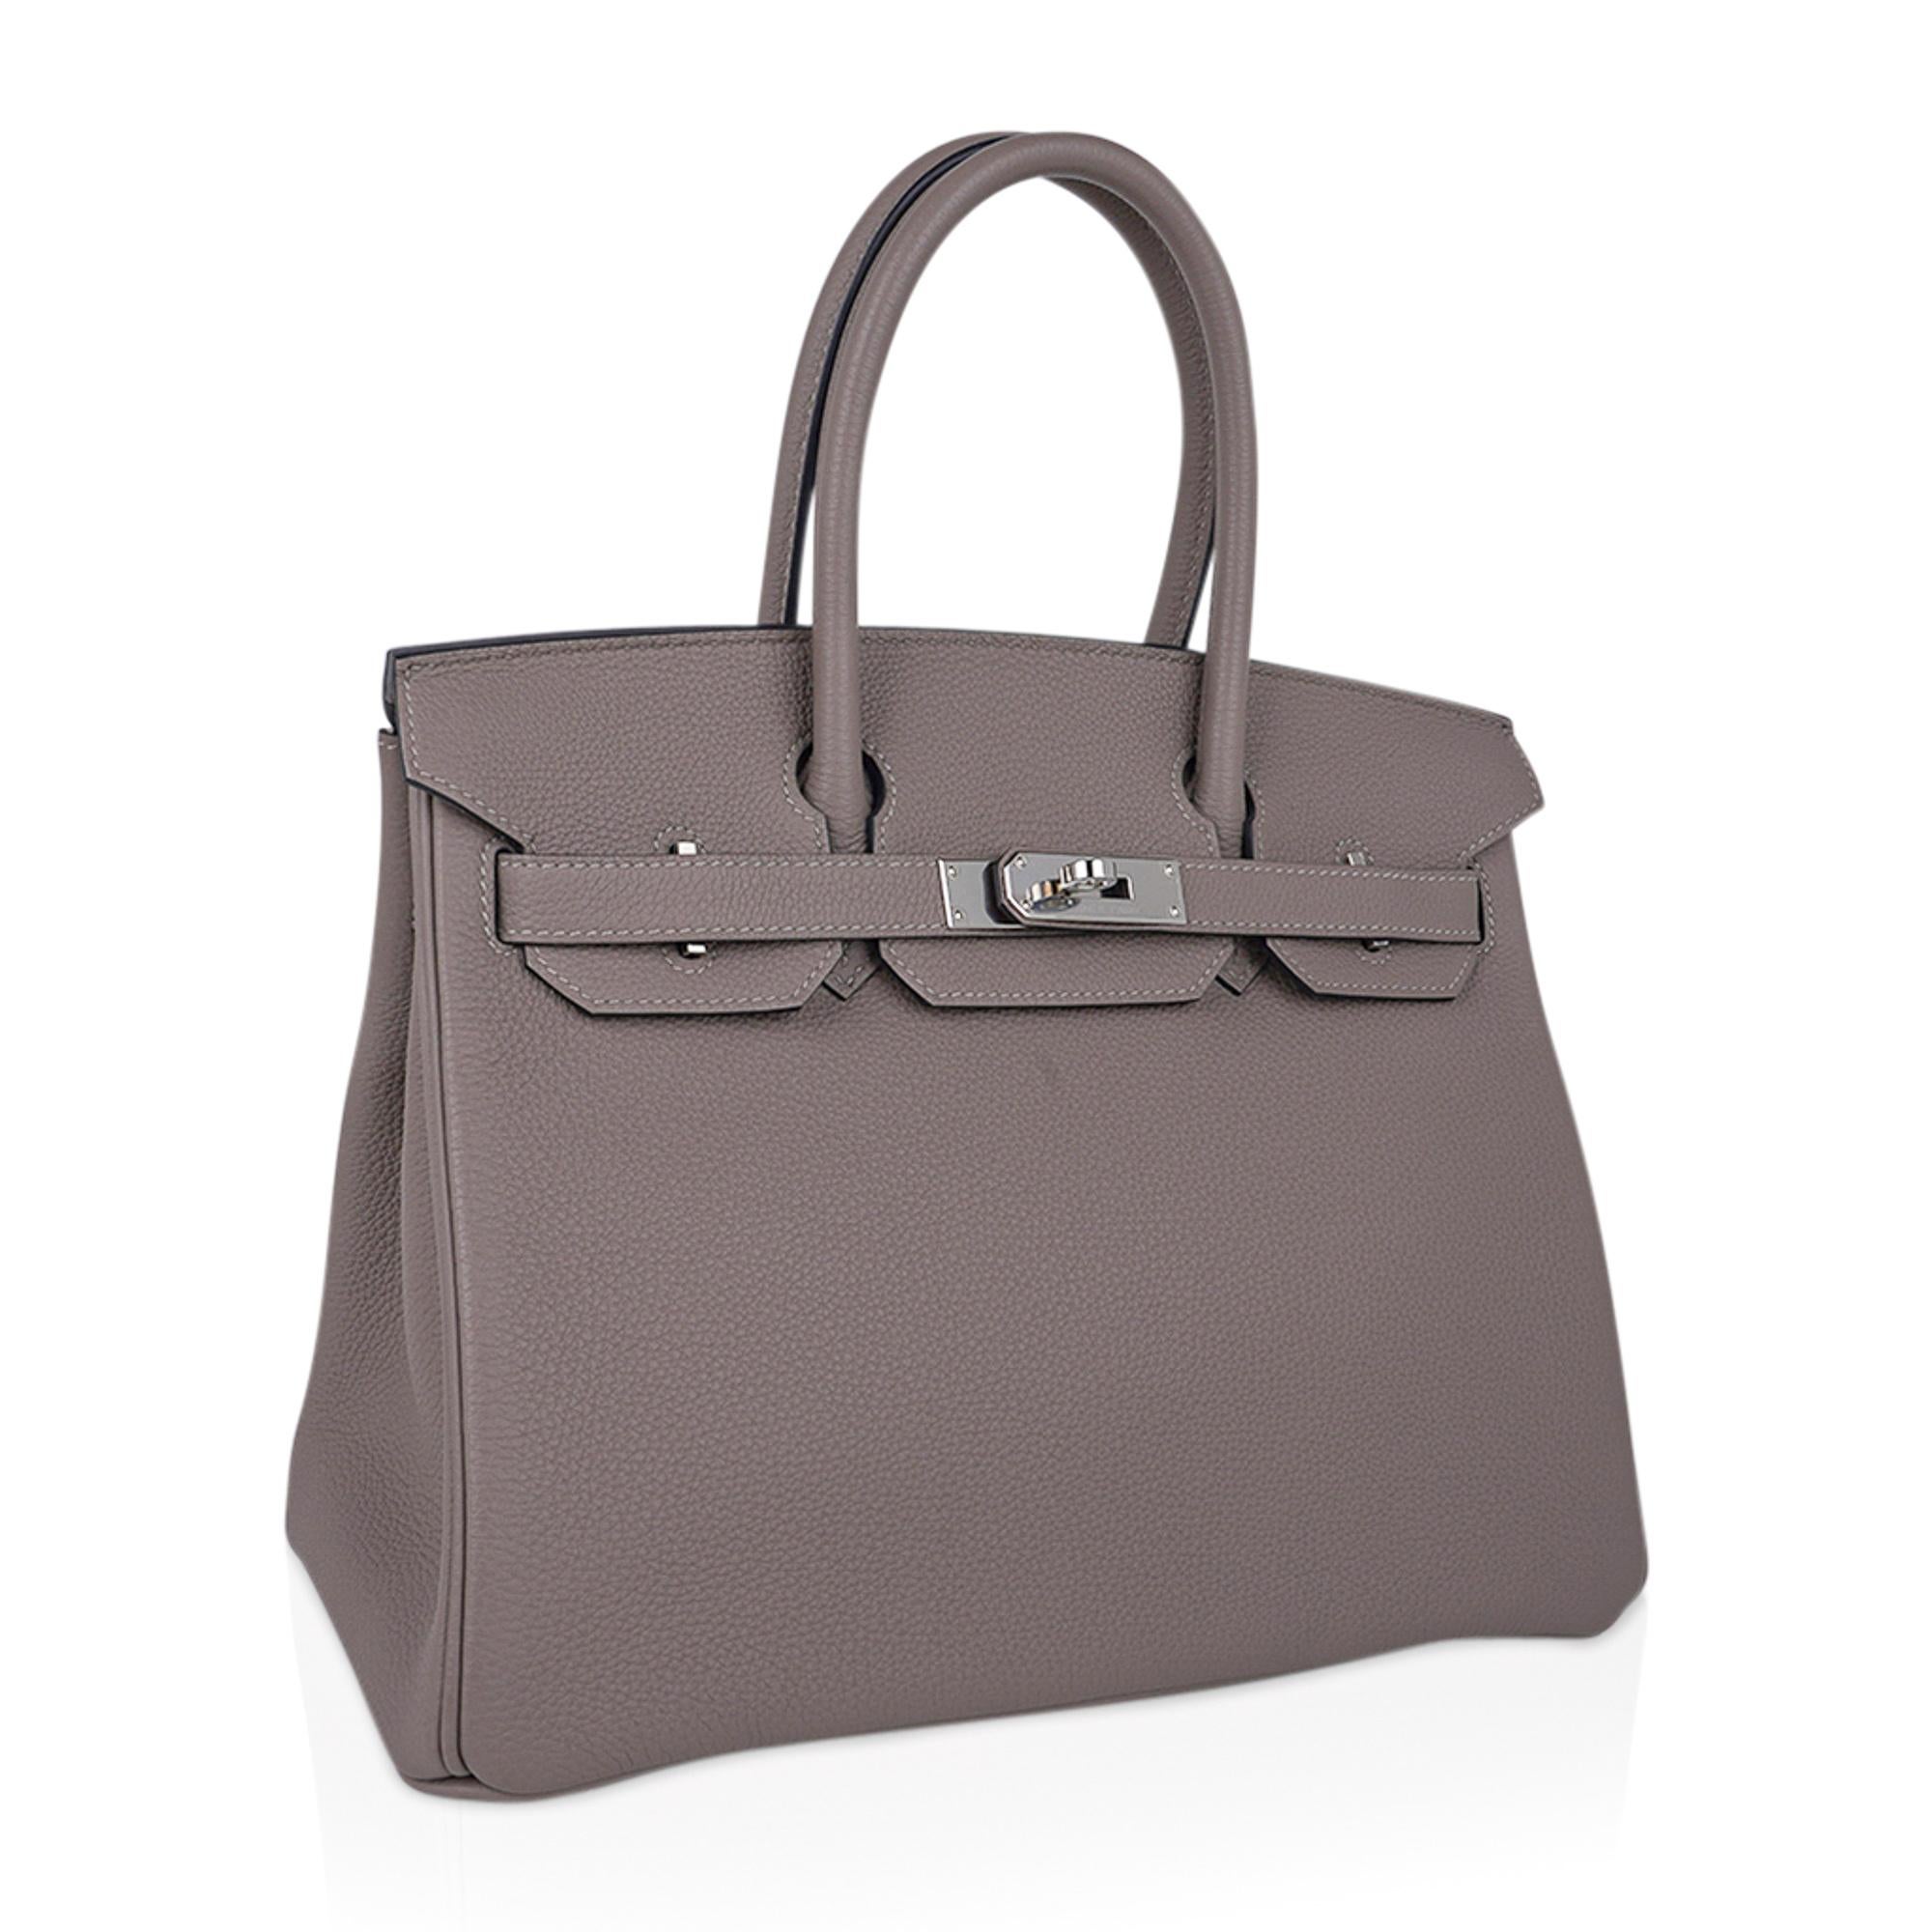 Mightychic offers an Hermes Birkin 30 bag featured in the most perfect neutral Gris Asphalte.
This stunning greige toned colour is the most perfect gray.
Fresh with palladium hardware and togo leather.
This beauty will take you year round.
Comes